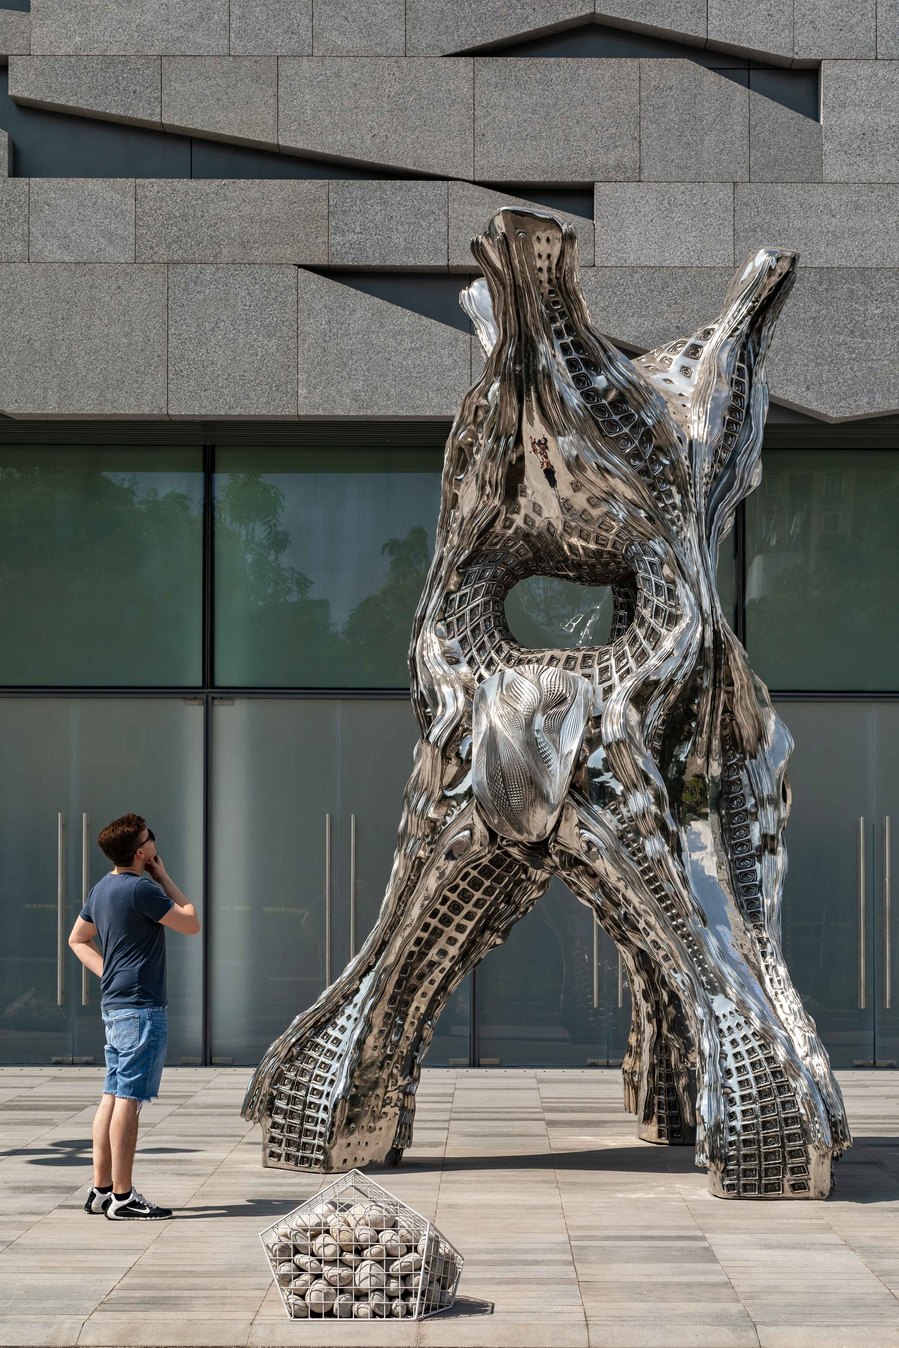 Canadian design studio LuxMea has unveiled Plethora, a large-scale, 3D printed outdoor sculpture made in marine-grade stainless steel. Adrian Ozimek Toronto, Vancouver, Nova Scotia Photographer Shenzen China CEEC Photography architecture